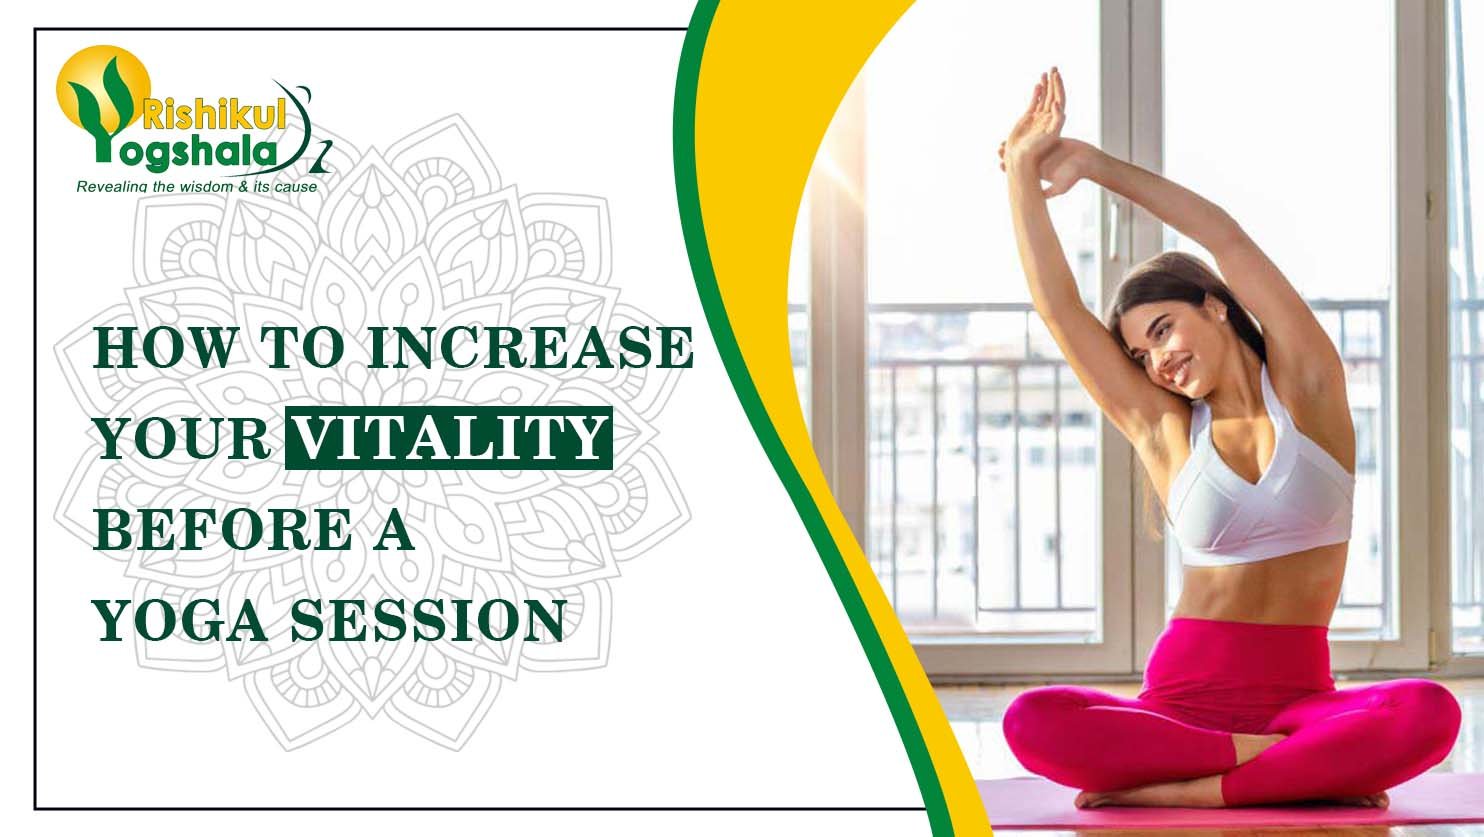 How to Increase Your Vitality Before a Yoga Session